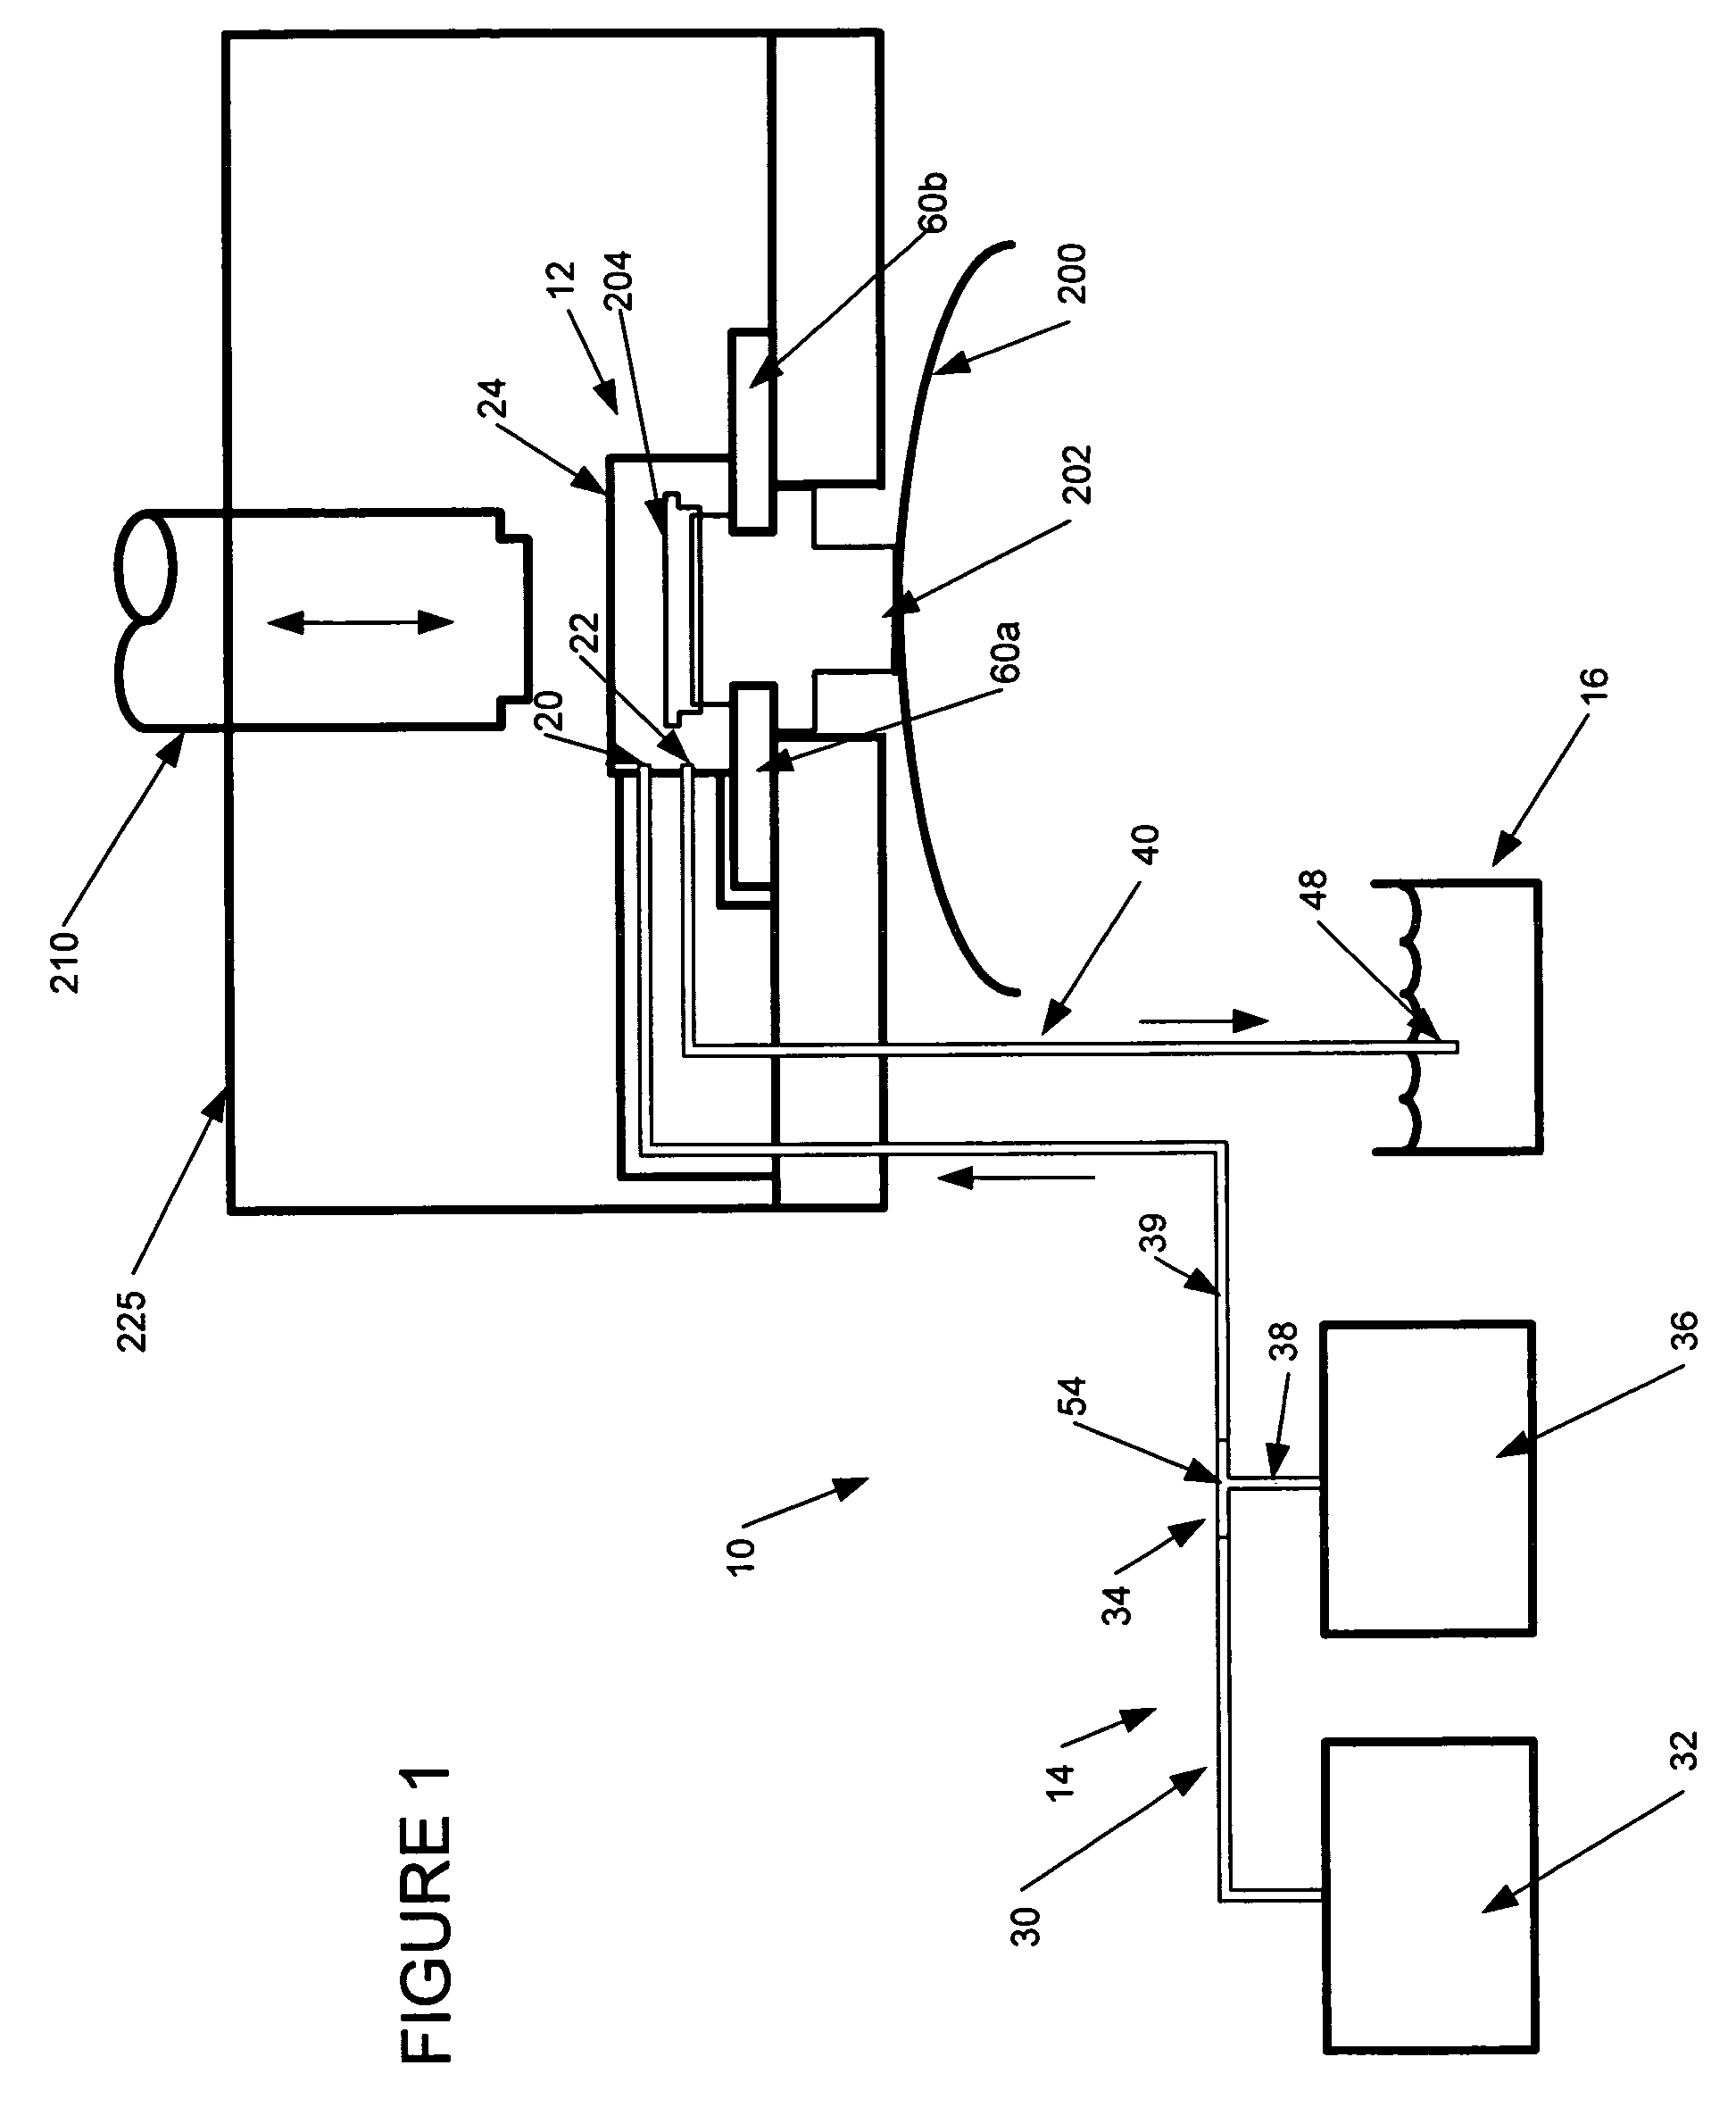 Sterilization system and method suitable for use in association with filler devices